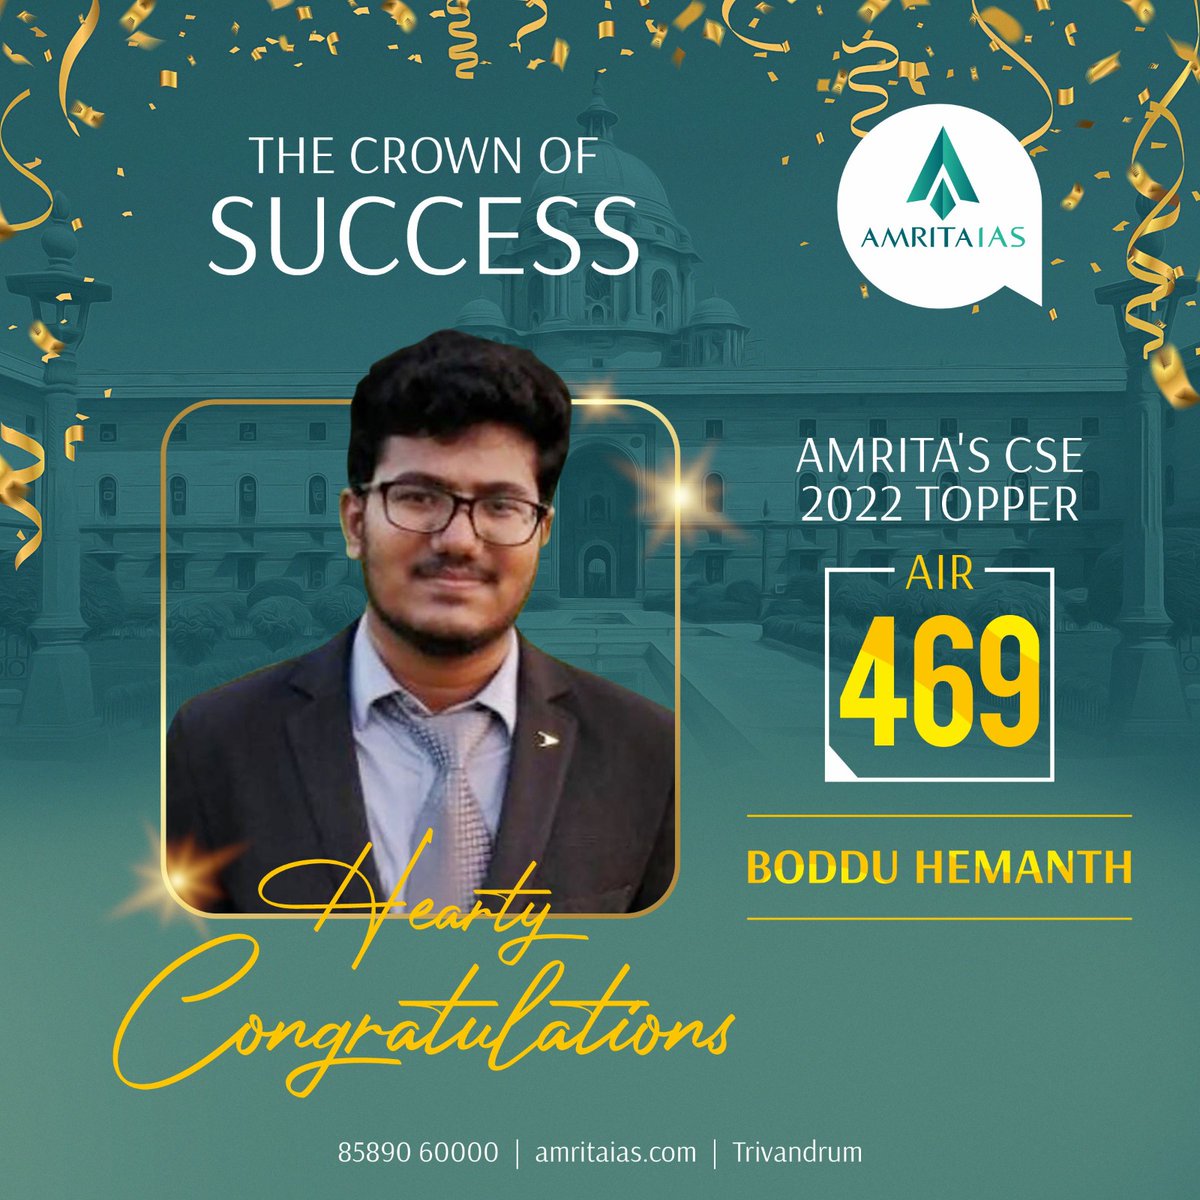 Congratulations to Boddu Hemanth on securing AIR - 469 in UPSC CSE 2022. 

#upscexam #ias #ips #ifs #amritaias #amritaiasacademy #UPSC #upscexam #iasofficer #iasacademy #iascoachingacademy #civilservicesexams #bestiasacademy #pcm #iastoppers #onlinebatch #onlineiasbatch